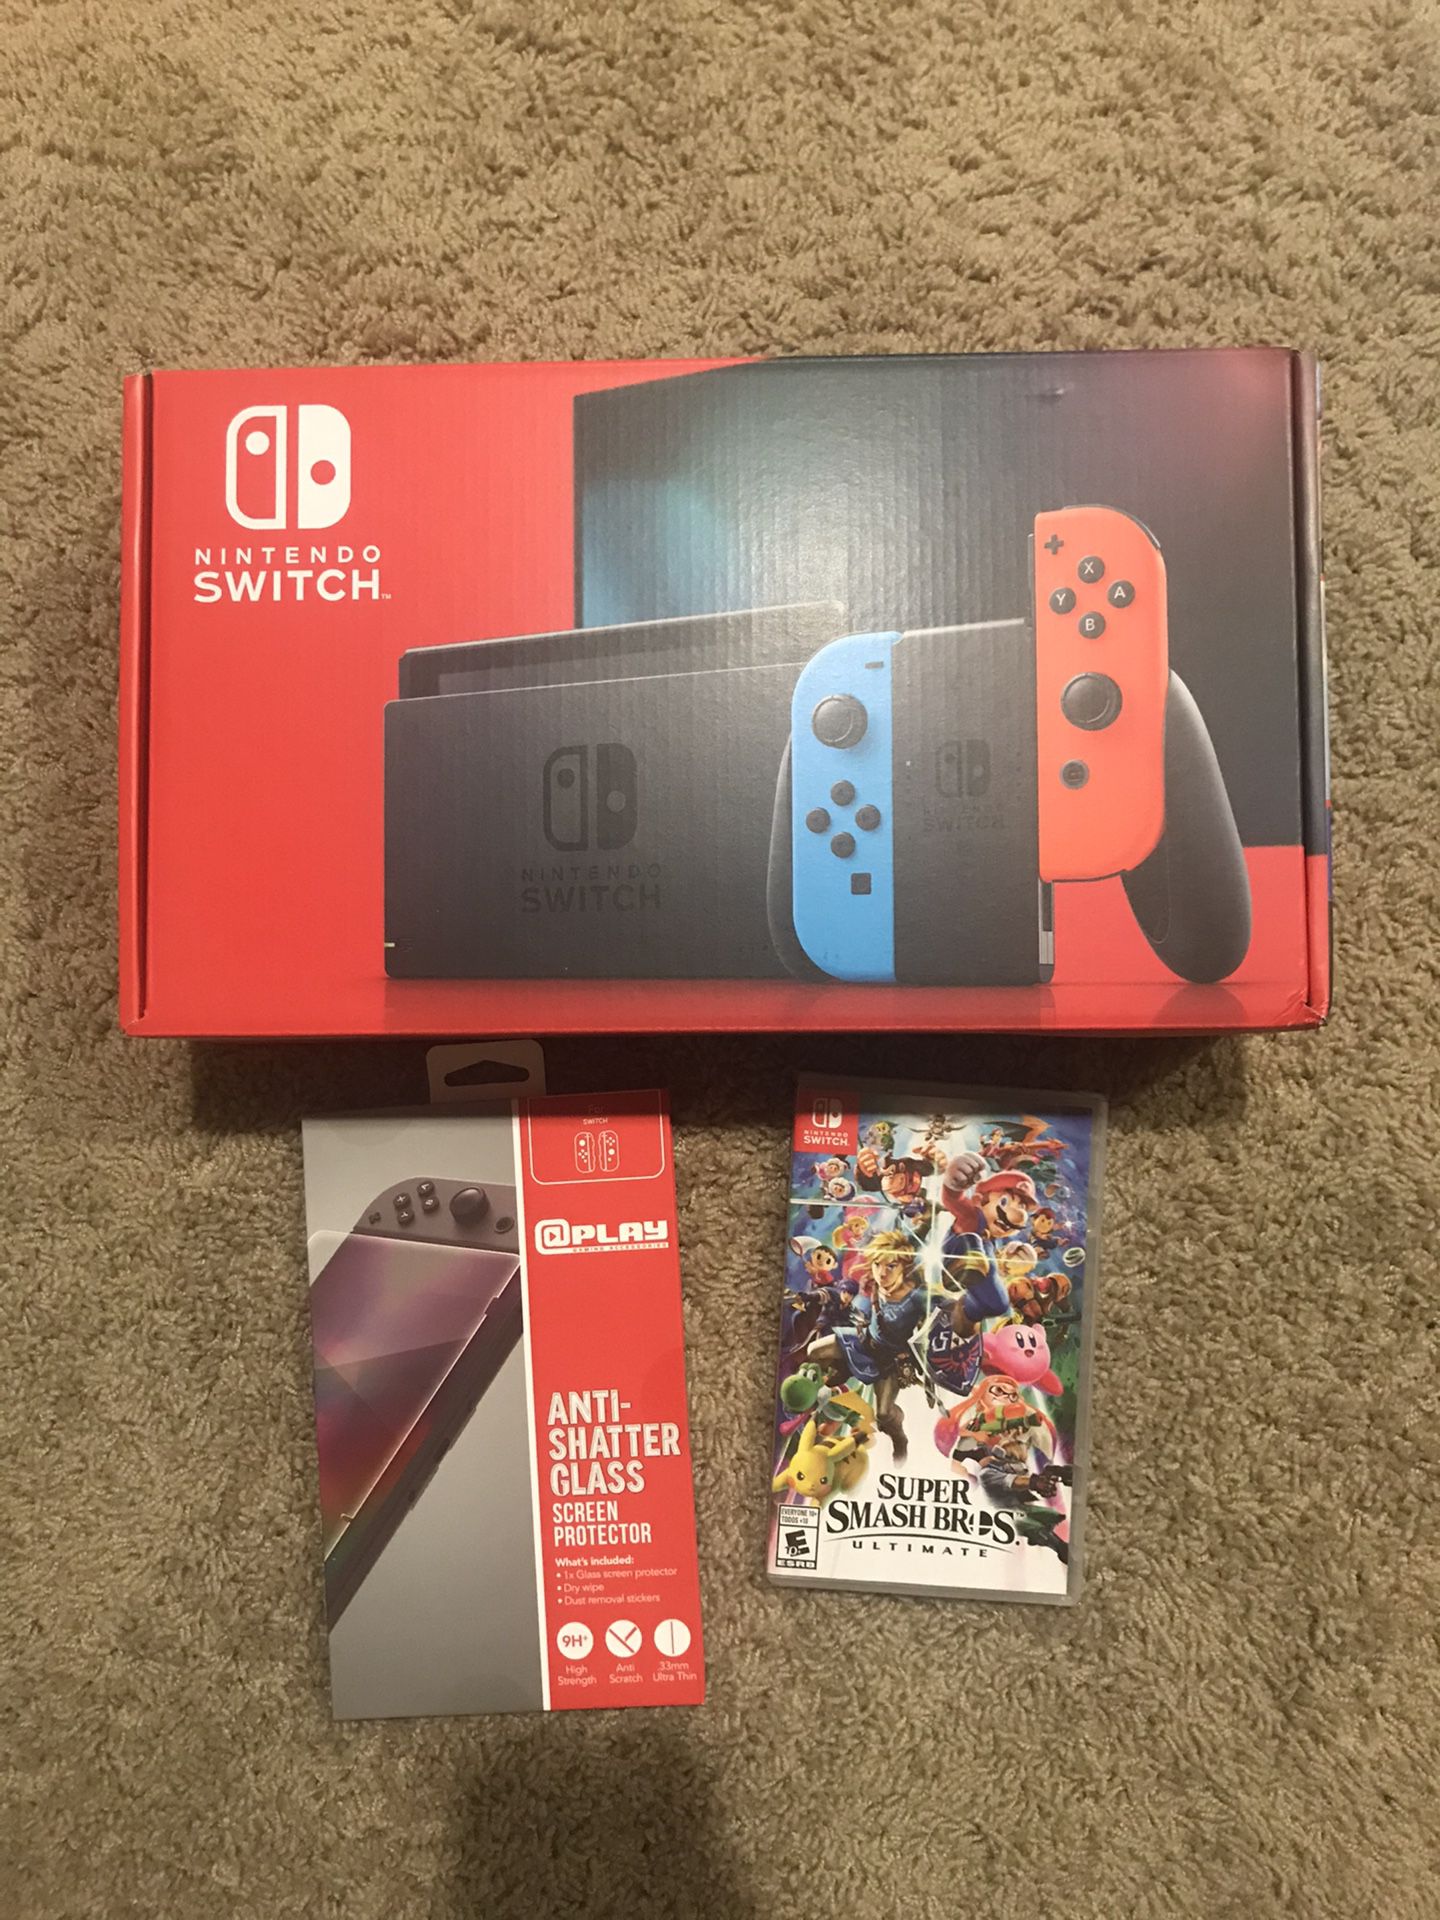 Nintendo Switch Neon Bundle with Super Smash Bro’s and Screen Protector